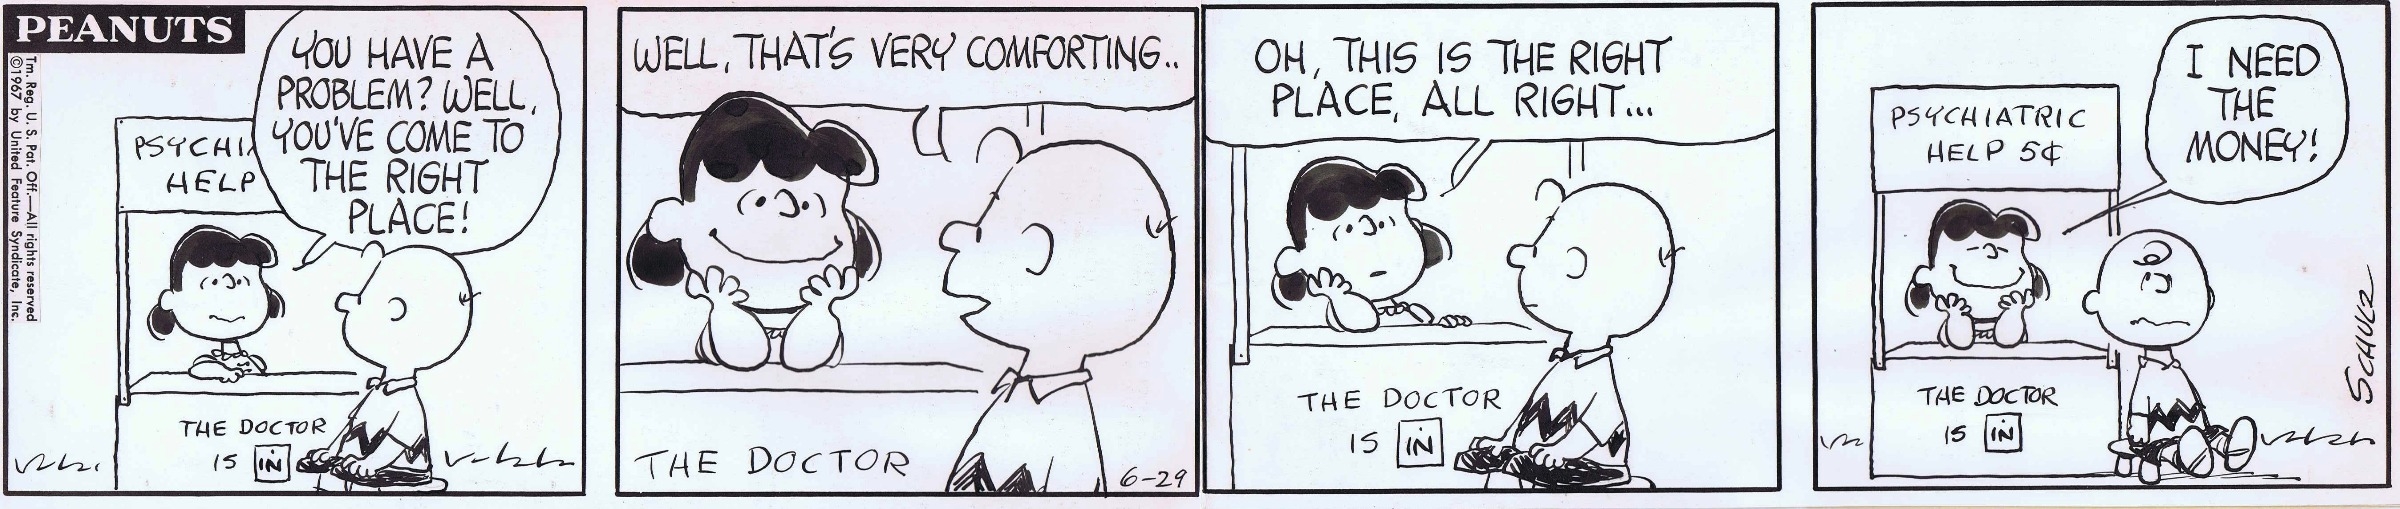 peanuts-daily-1967-lucy-the-psychiatrist-in-rob-pistella-s-other-fine-artists-comic-art